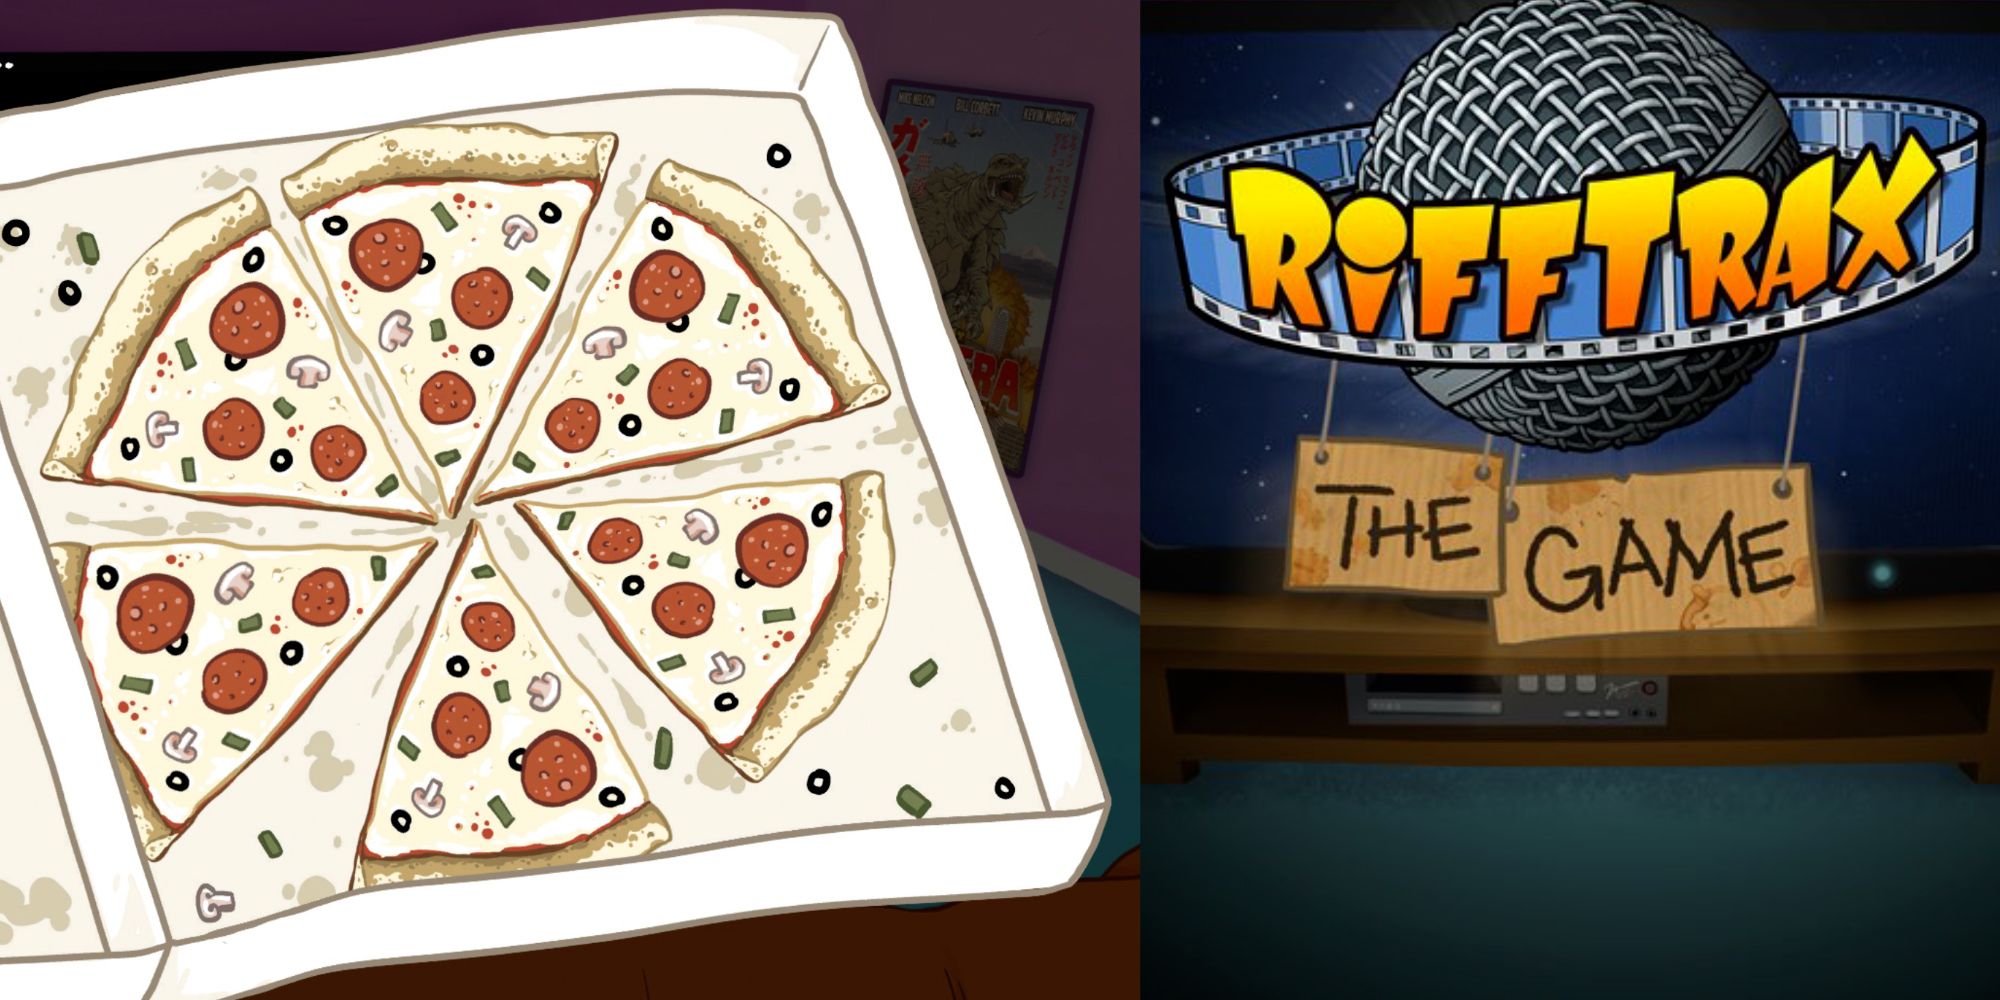 Banner Image Displaying a pizza in RiffTrax the game on the left, and the cover of the game on the right